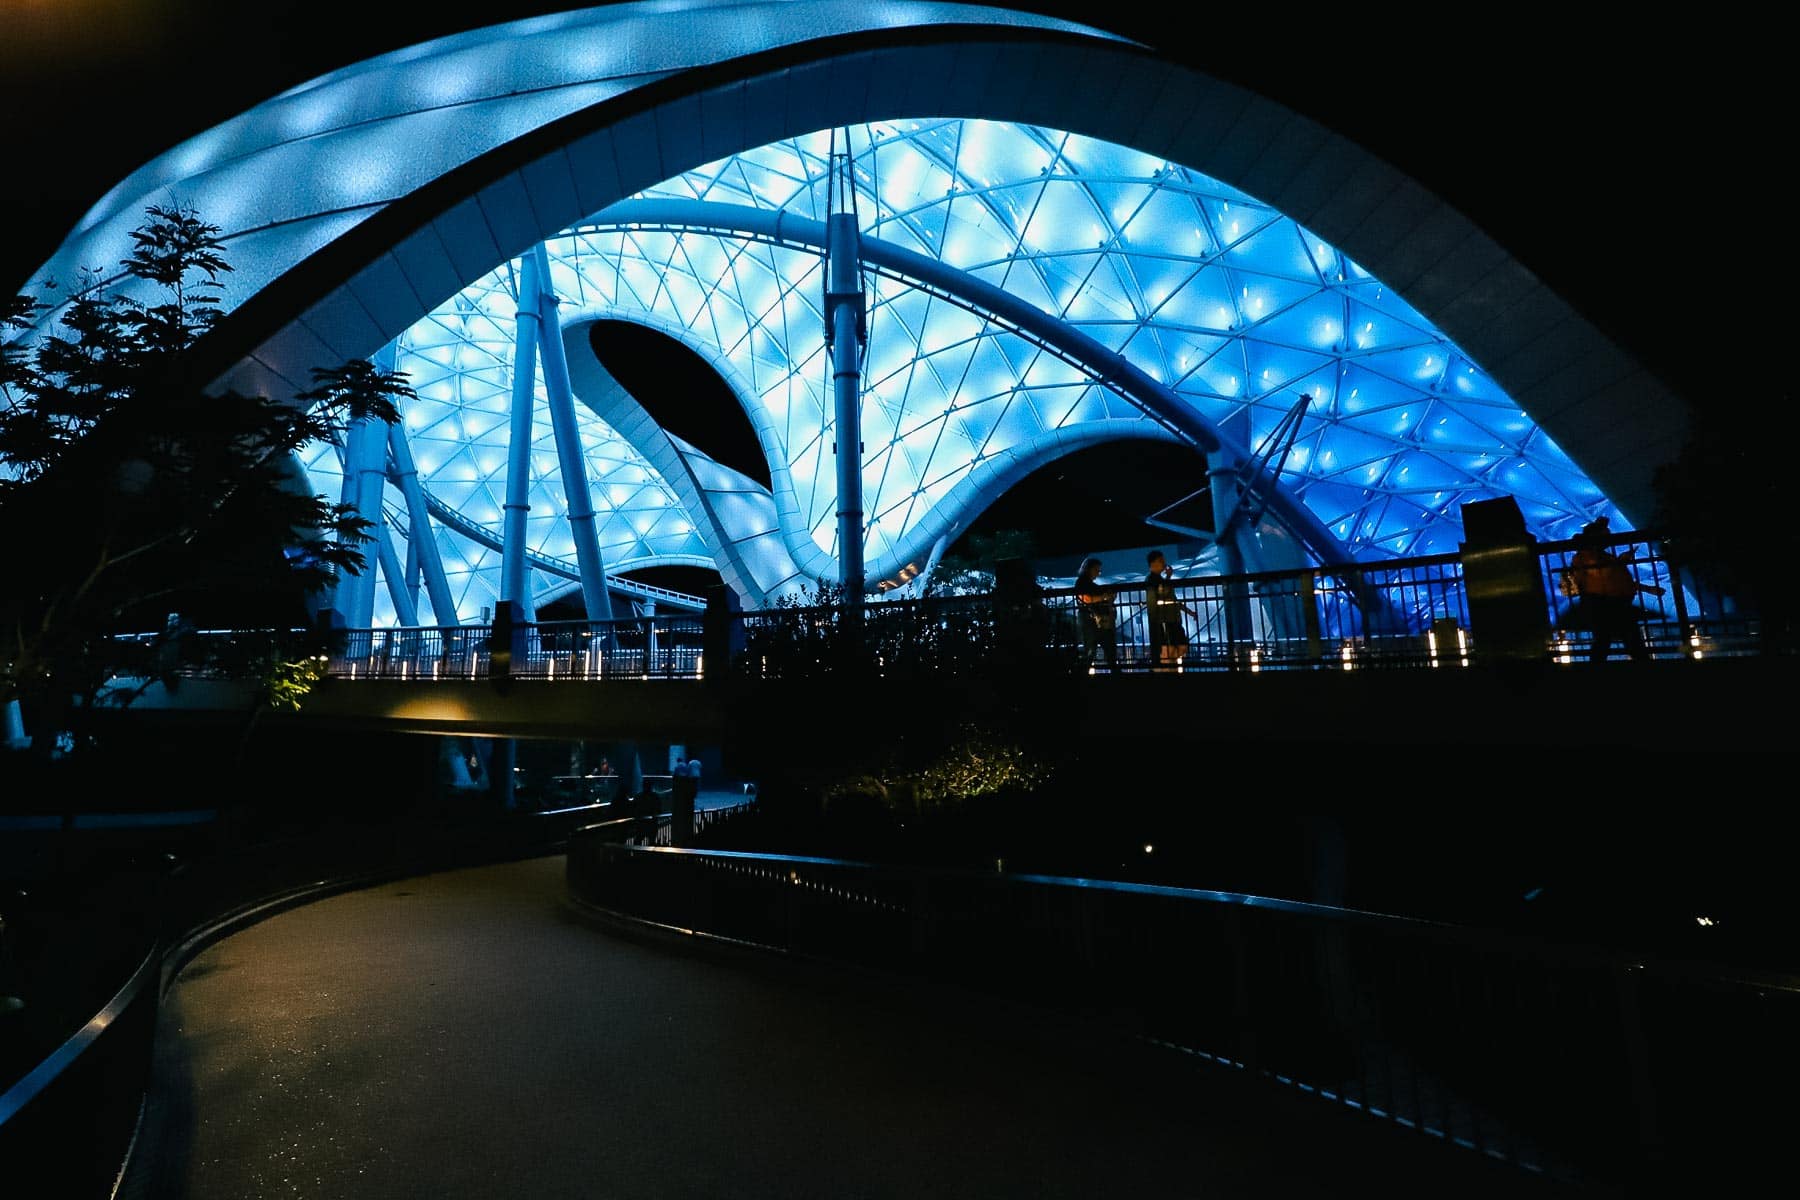 Tron Canopy after dark in Tomorrowland 